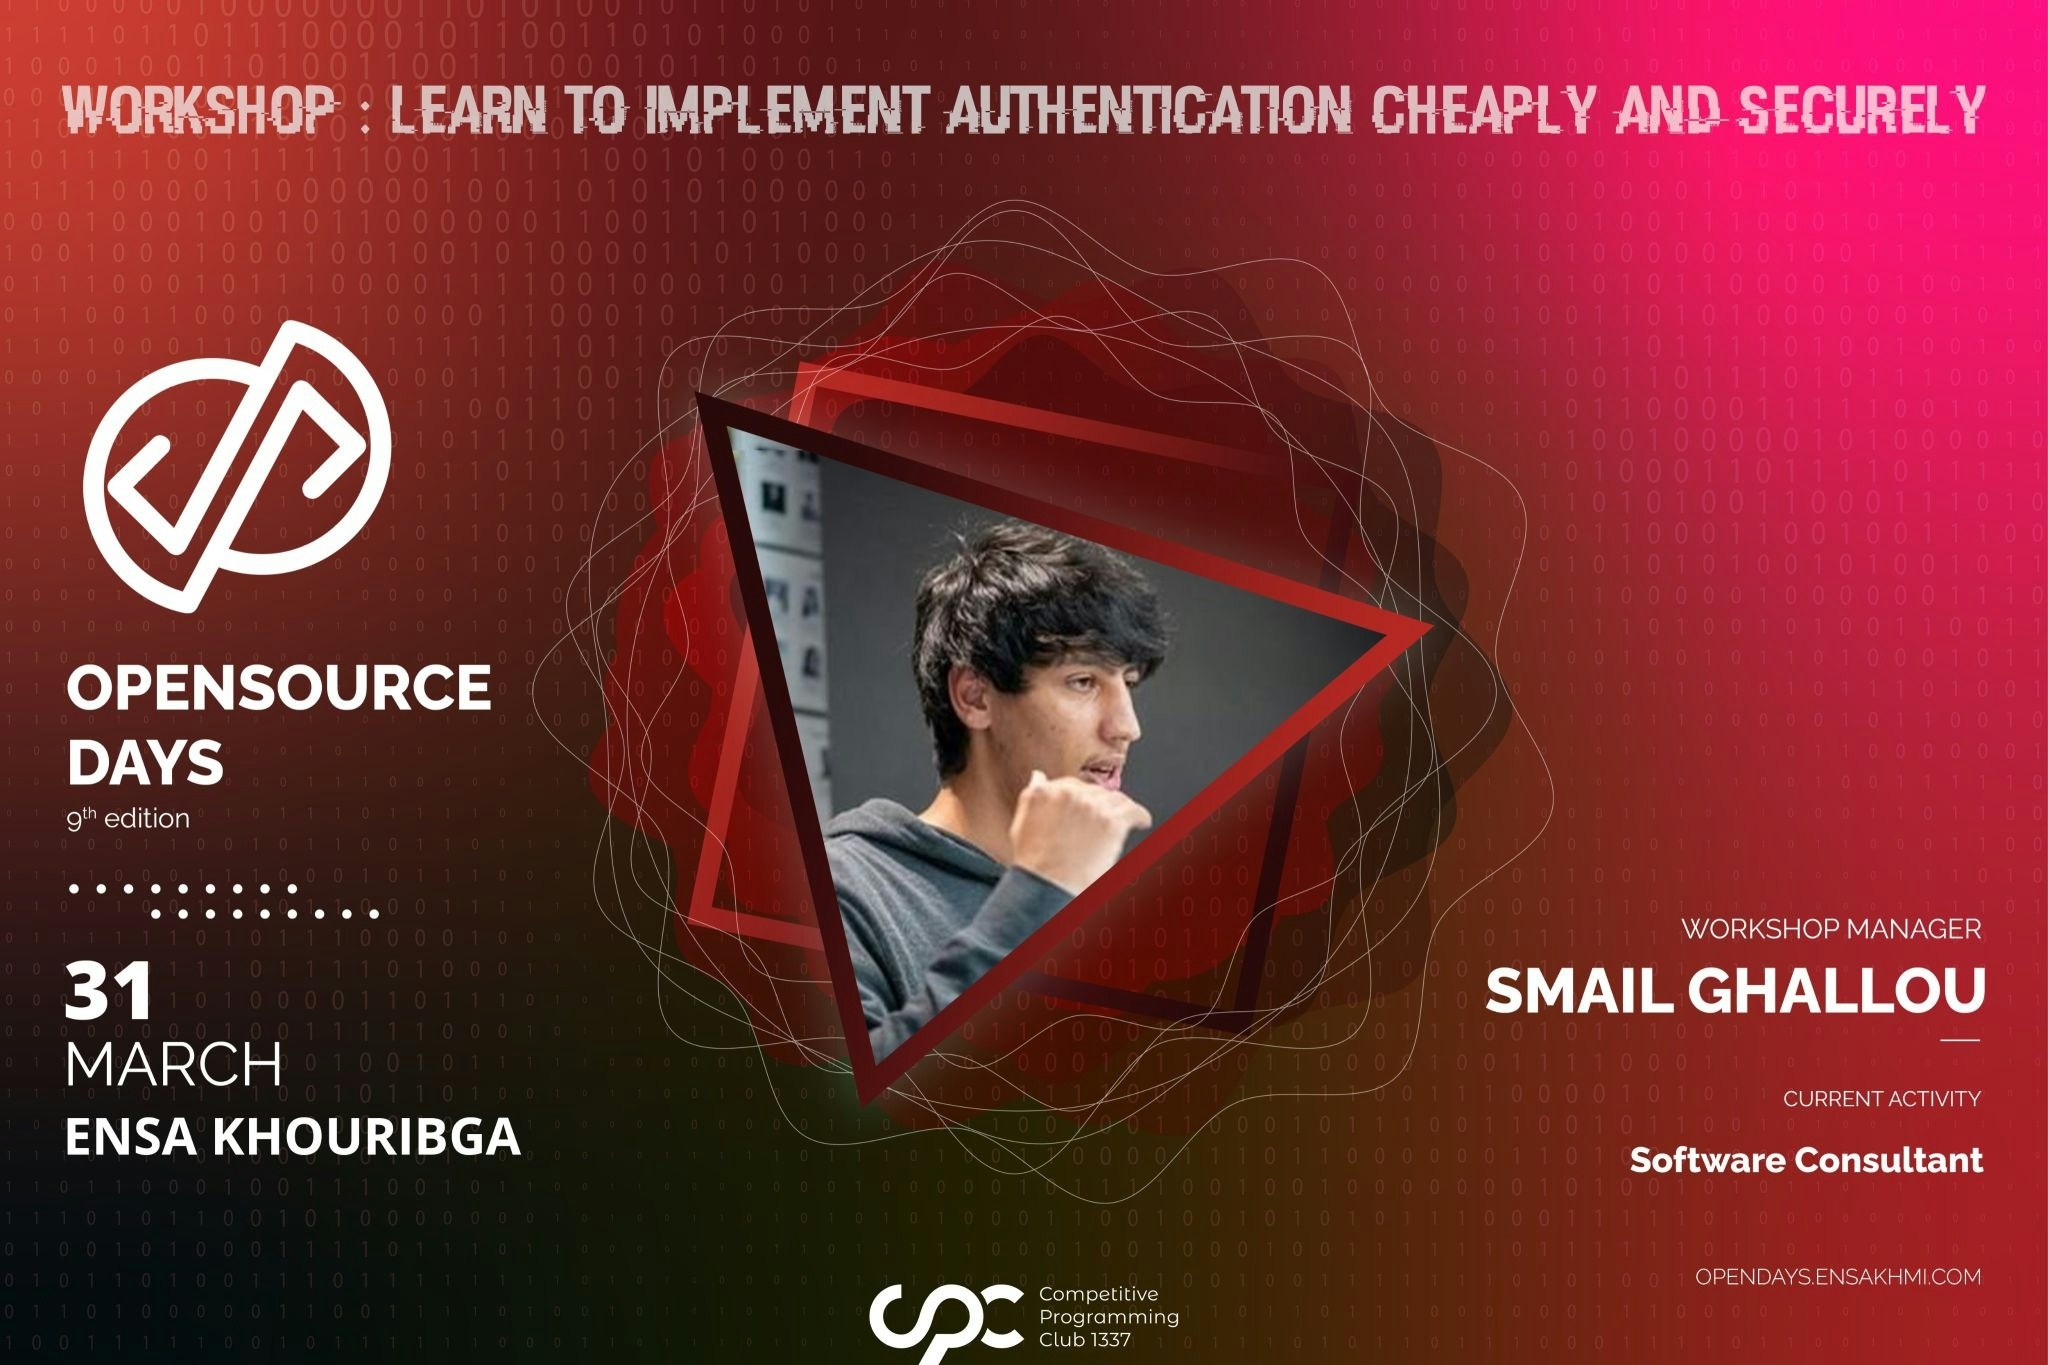 Learn to implement authentication cheaply and securely